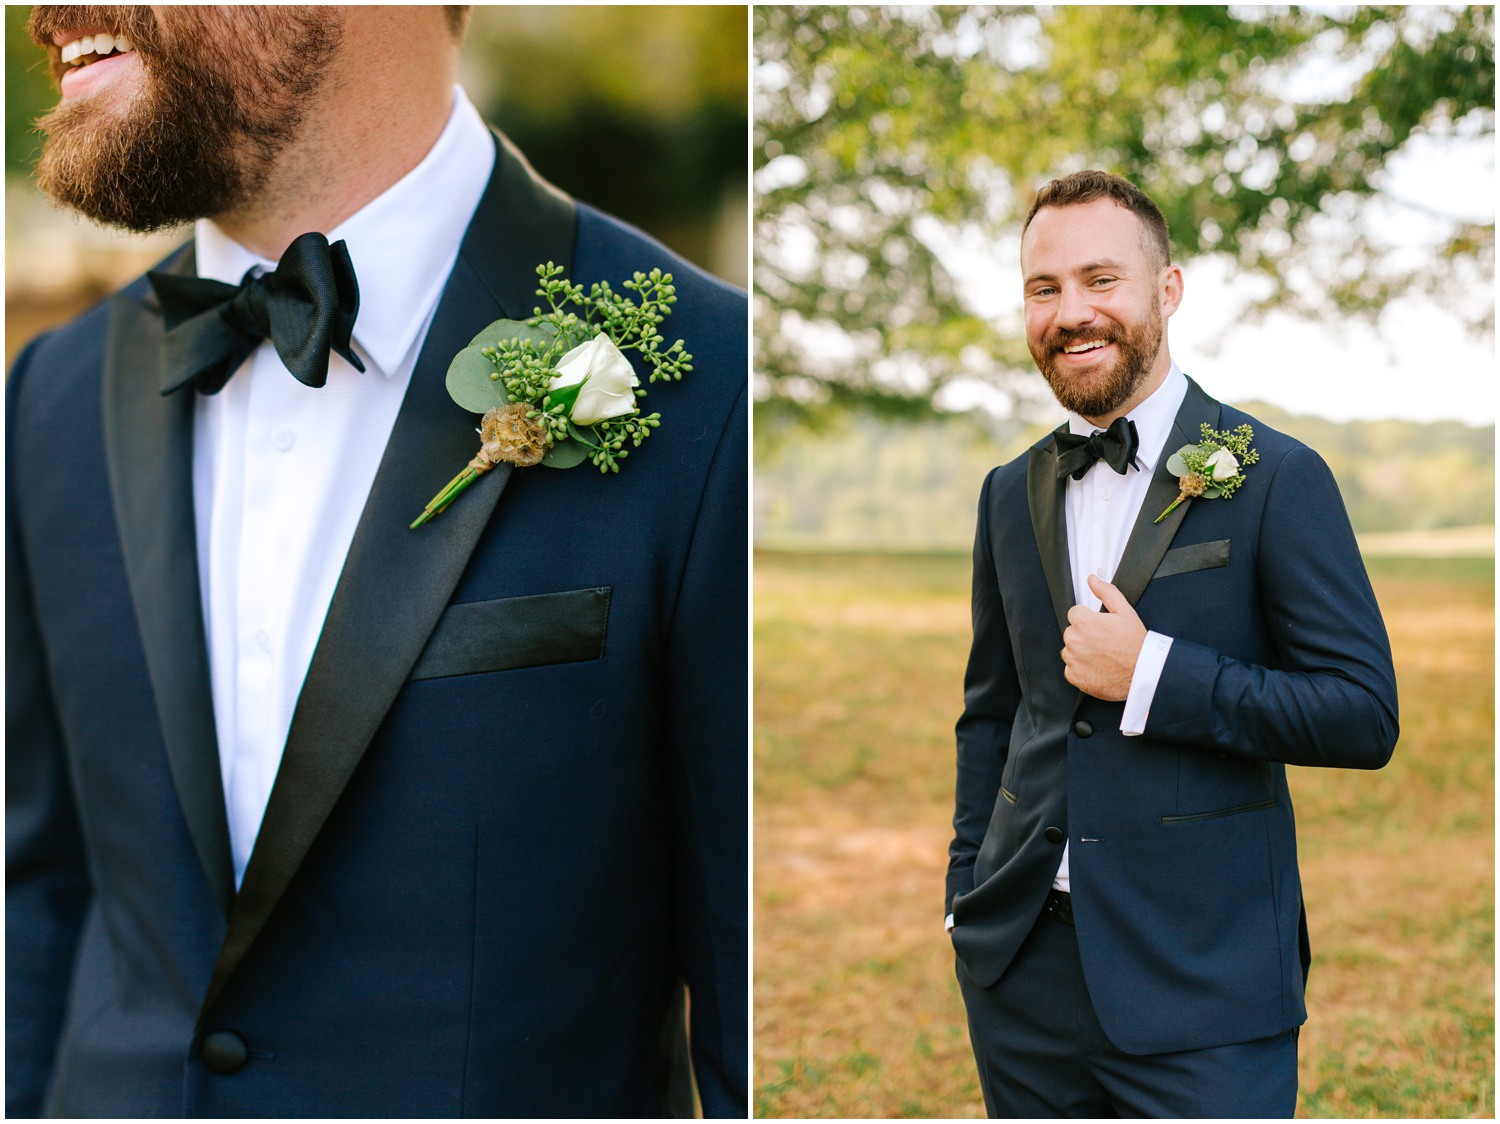 simple ivory boutonnière for the groom